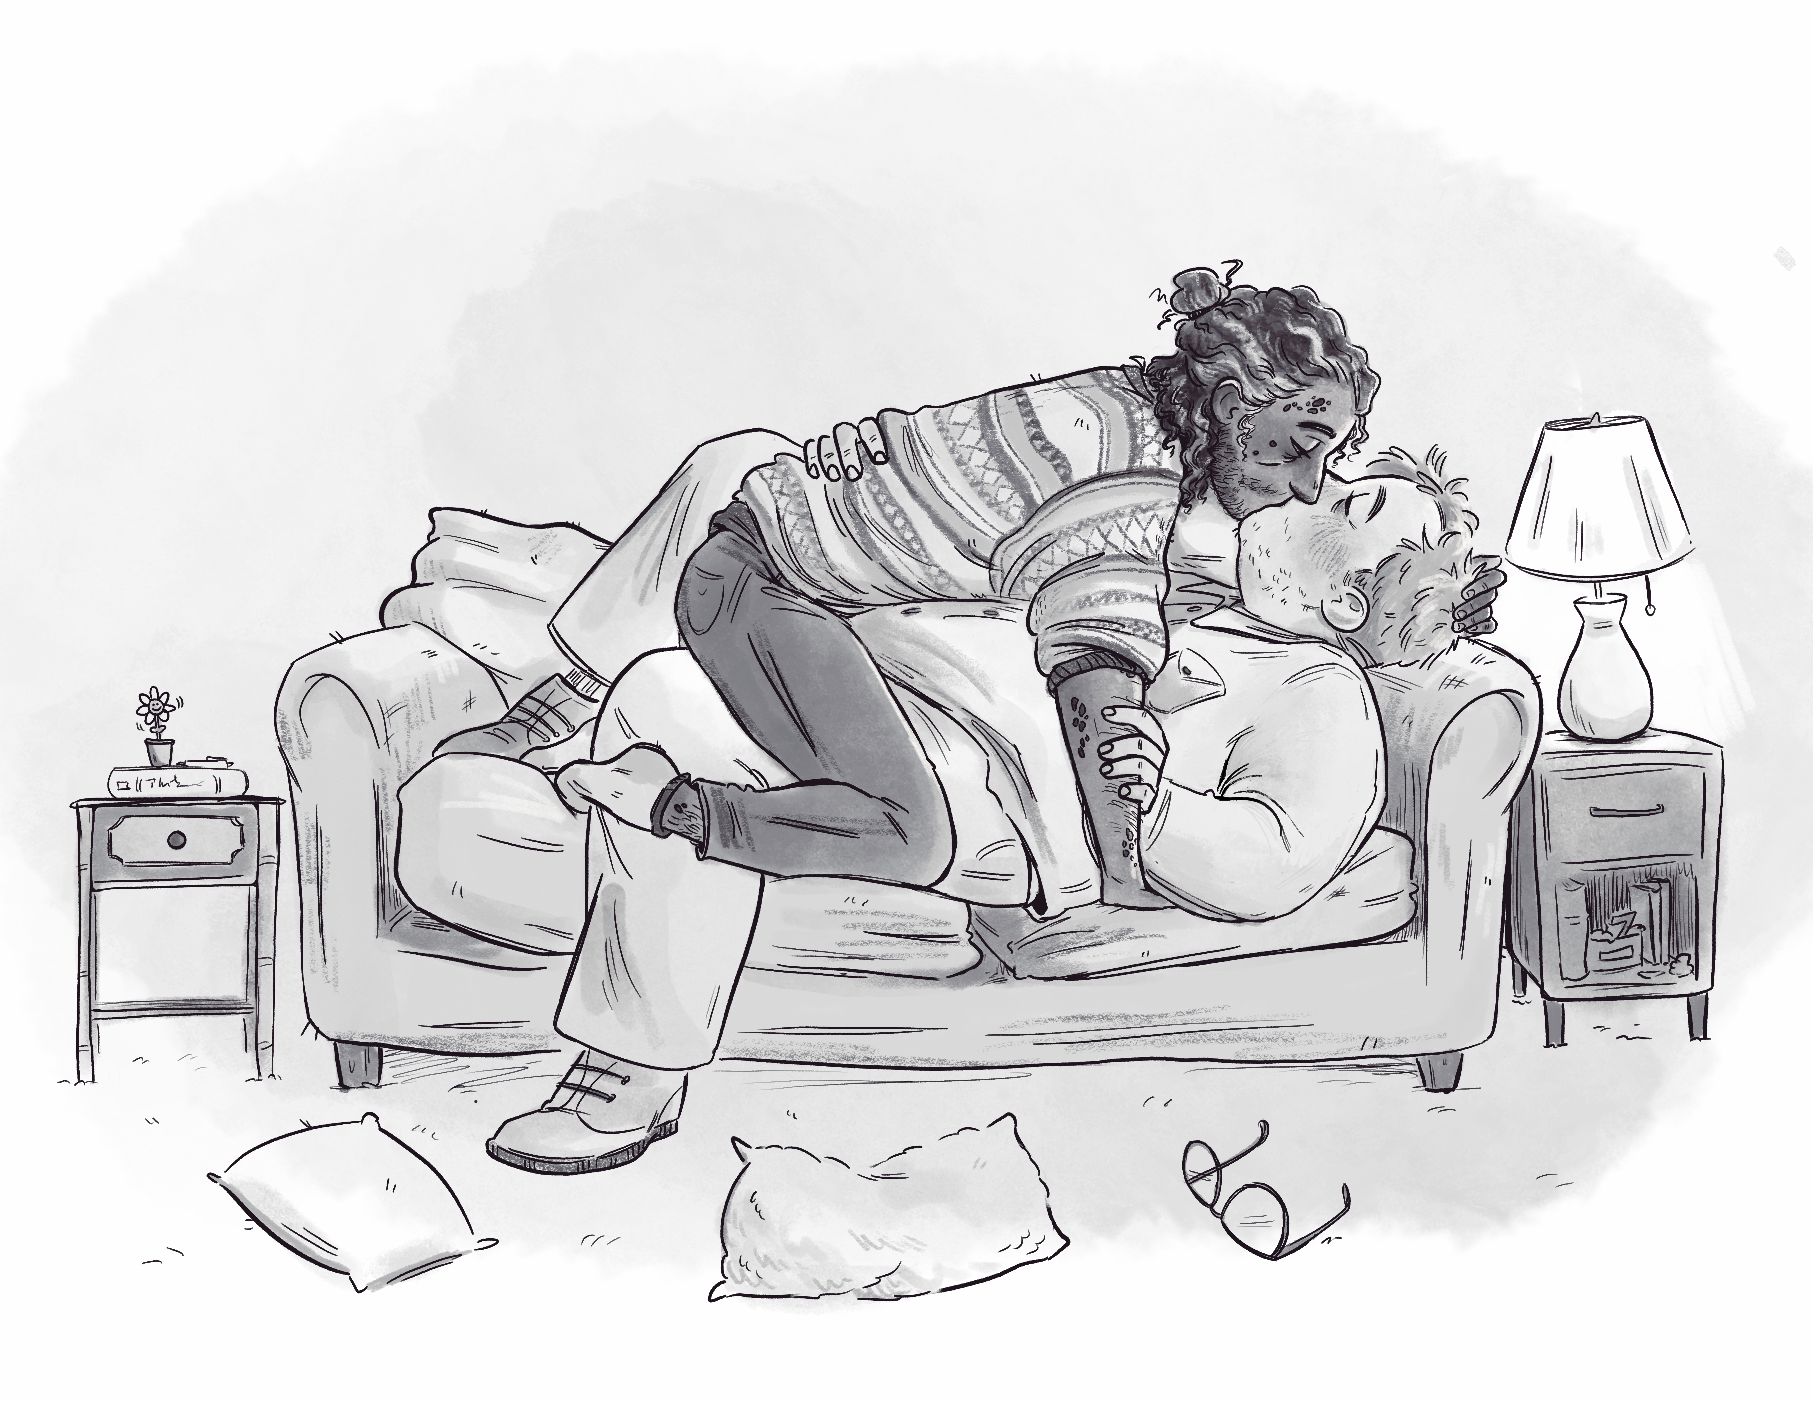 A drawing of Jon and Martin from The Magnus Archives by Hotdrinks in grayscale. Jon is a thin man with tan skin, shoulder length hair, circular scars, and a patterned sweater. Martin is a fat man with light skin, short hair, and is wearing a button up shirt. Jon is over Martin kissing him on the couch, holding the back of his head, while Martin has one hand wrapped around Jon's waist. On the floor is Martin's glasses and a few pillows. To the left of the couch is a table with a small solar-powered flower on it, and to the right of the couch is a table with a lamp.